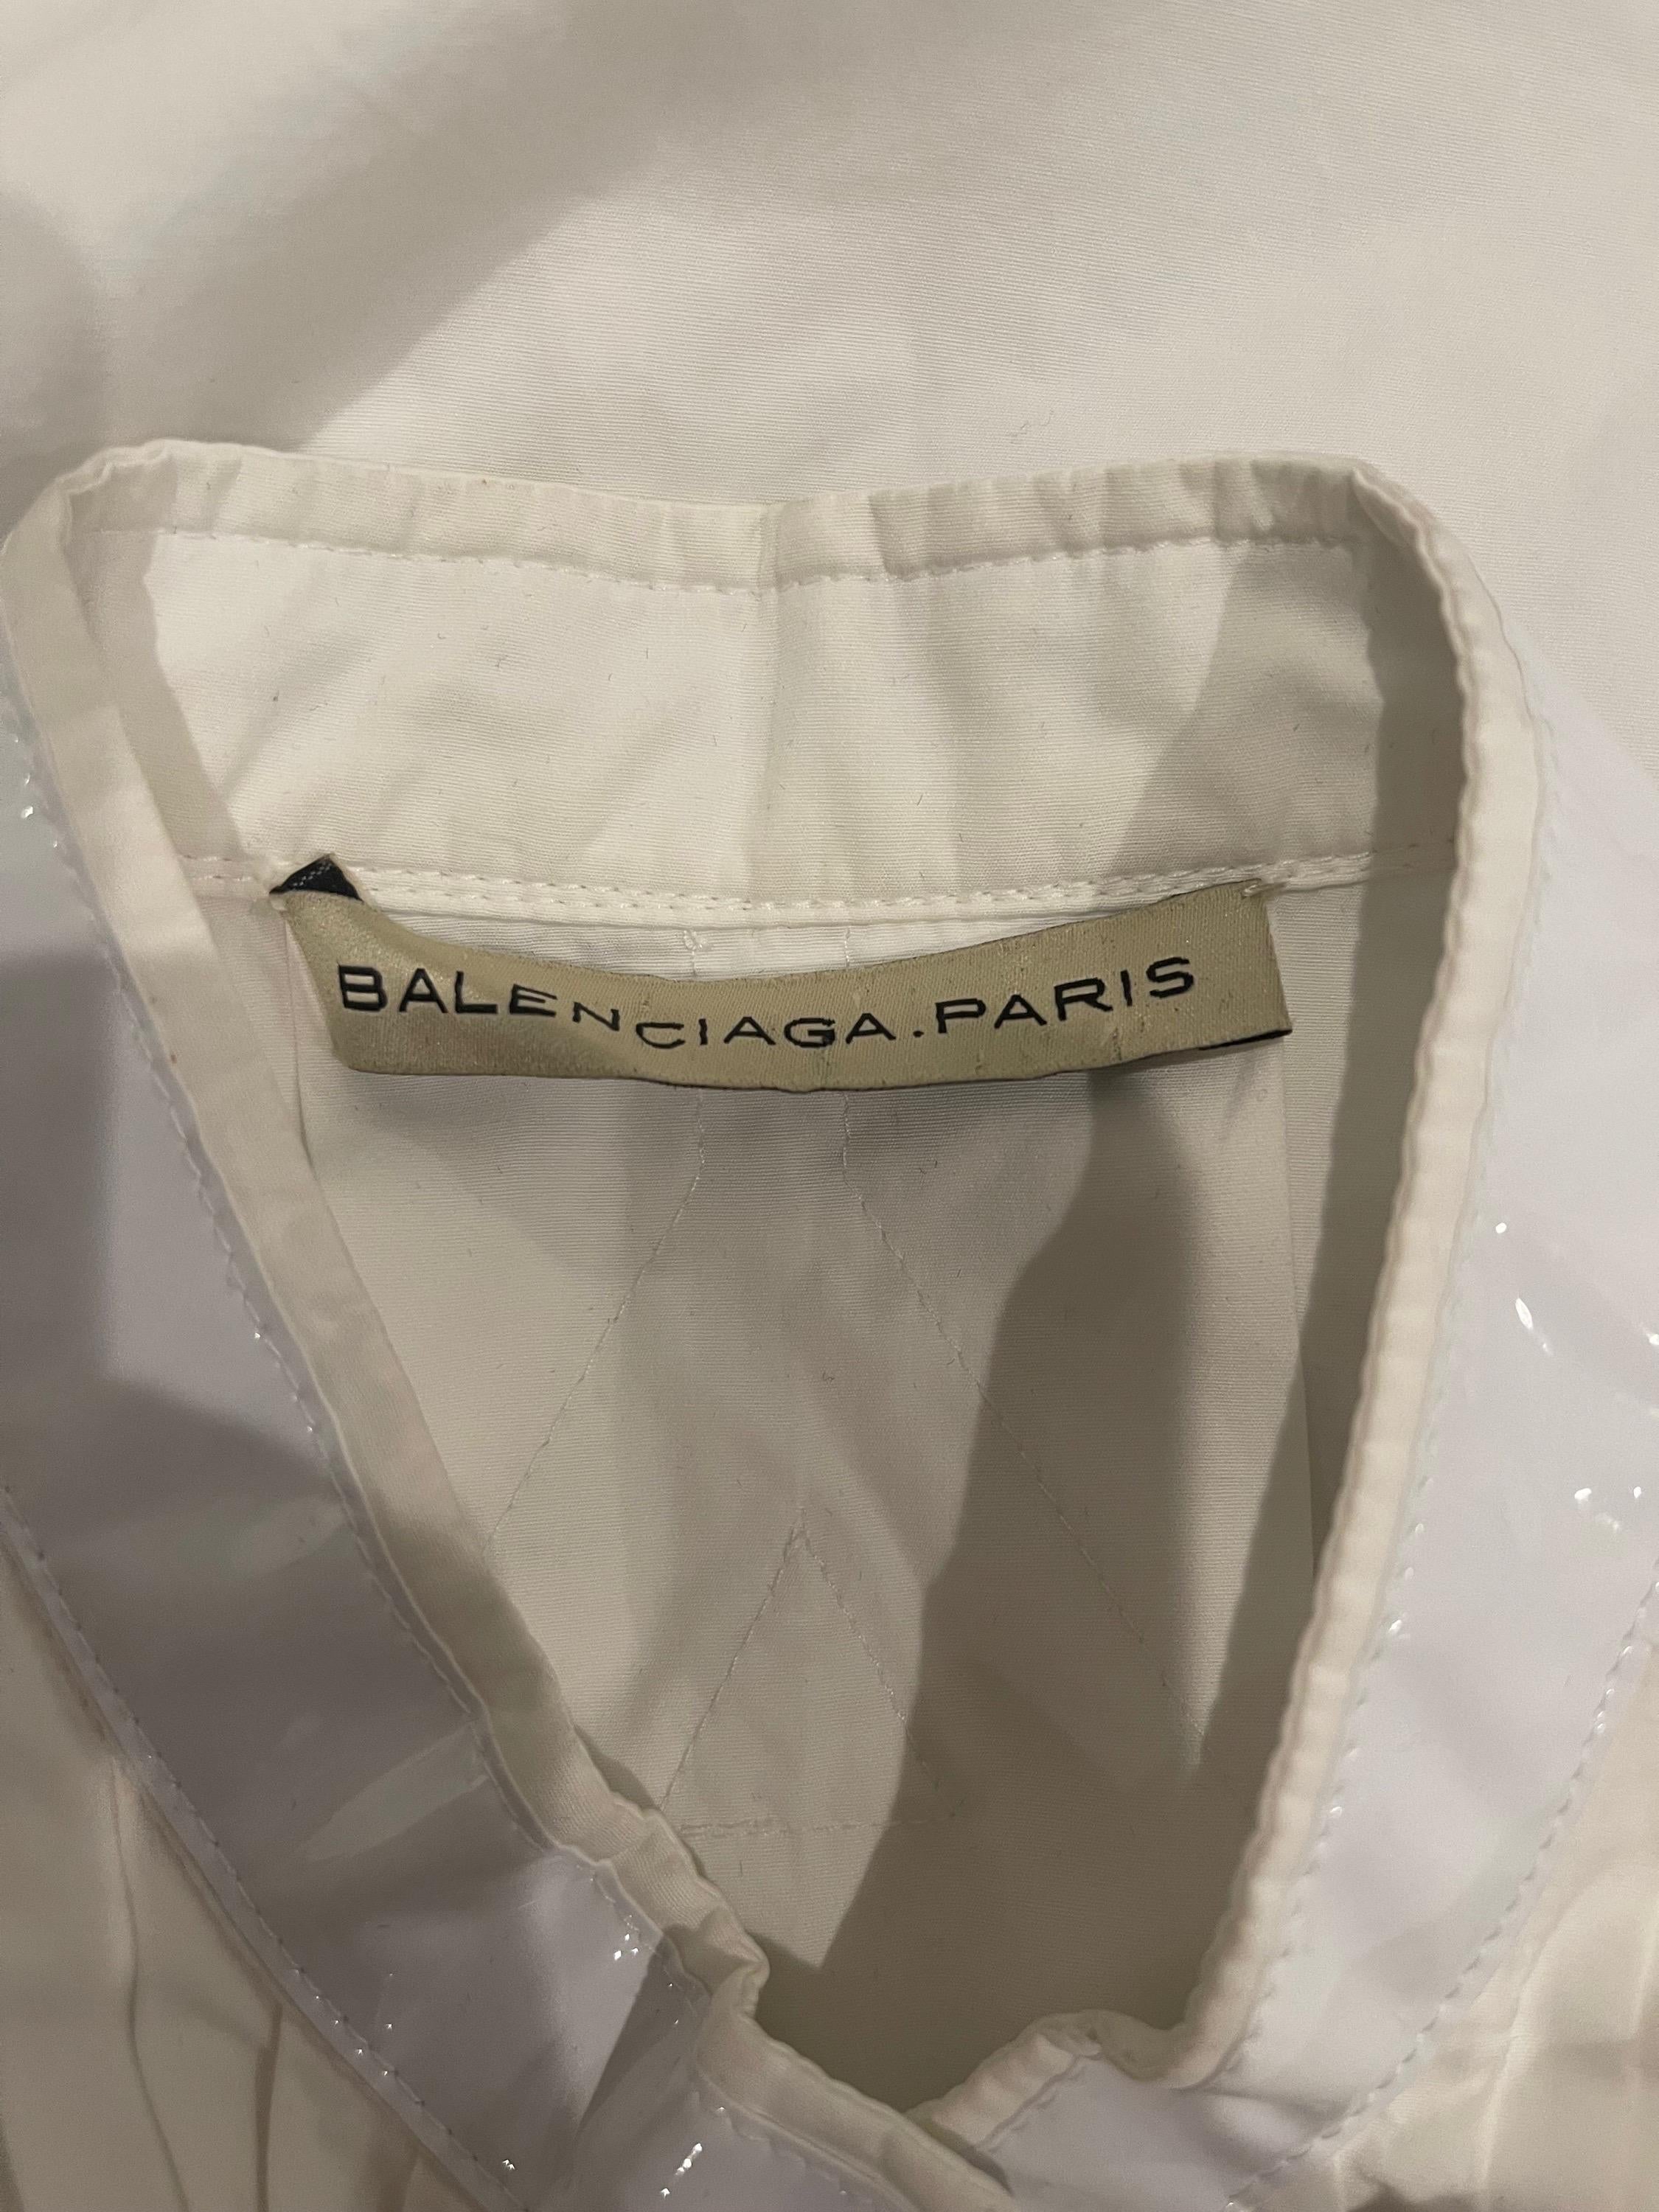 BALENCIAGA by NICOLAS GHESQUIERE Spring 2007 Runway white tuxedo shirt dress ! Cotton with white vinyl trim. Hidden buttons up the front. Can be worn a variety of ways, including as an open vest. Adjustable buttons at side hips.
In great unworn